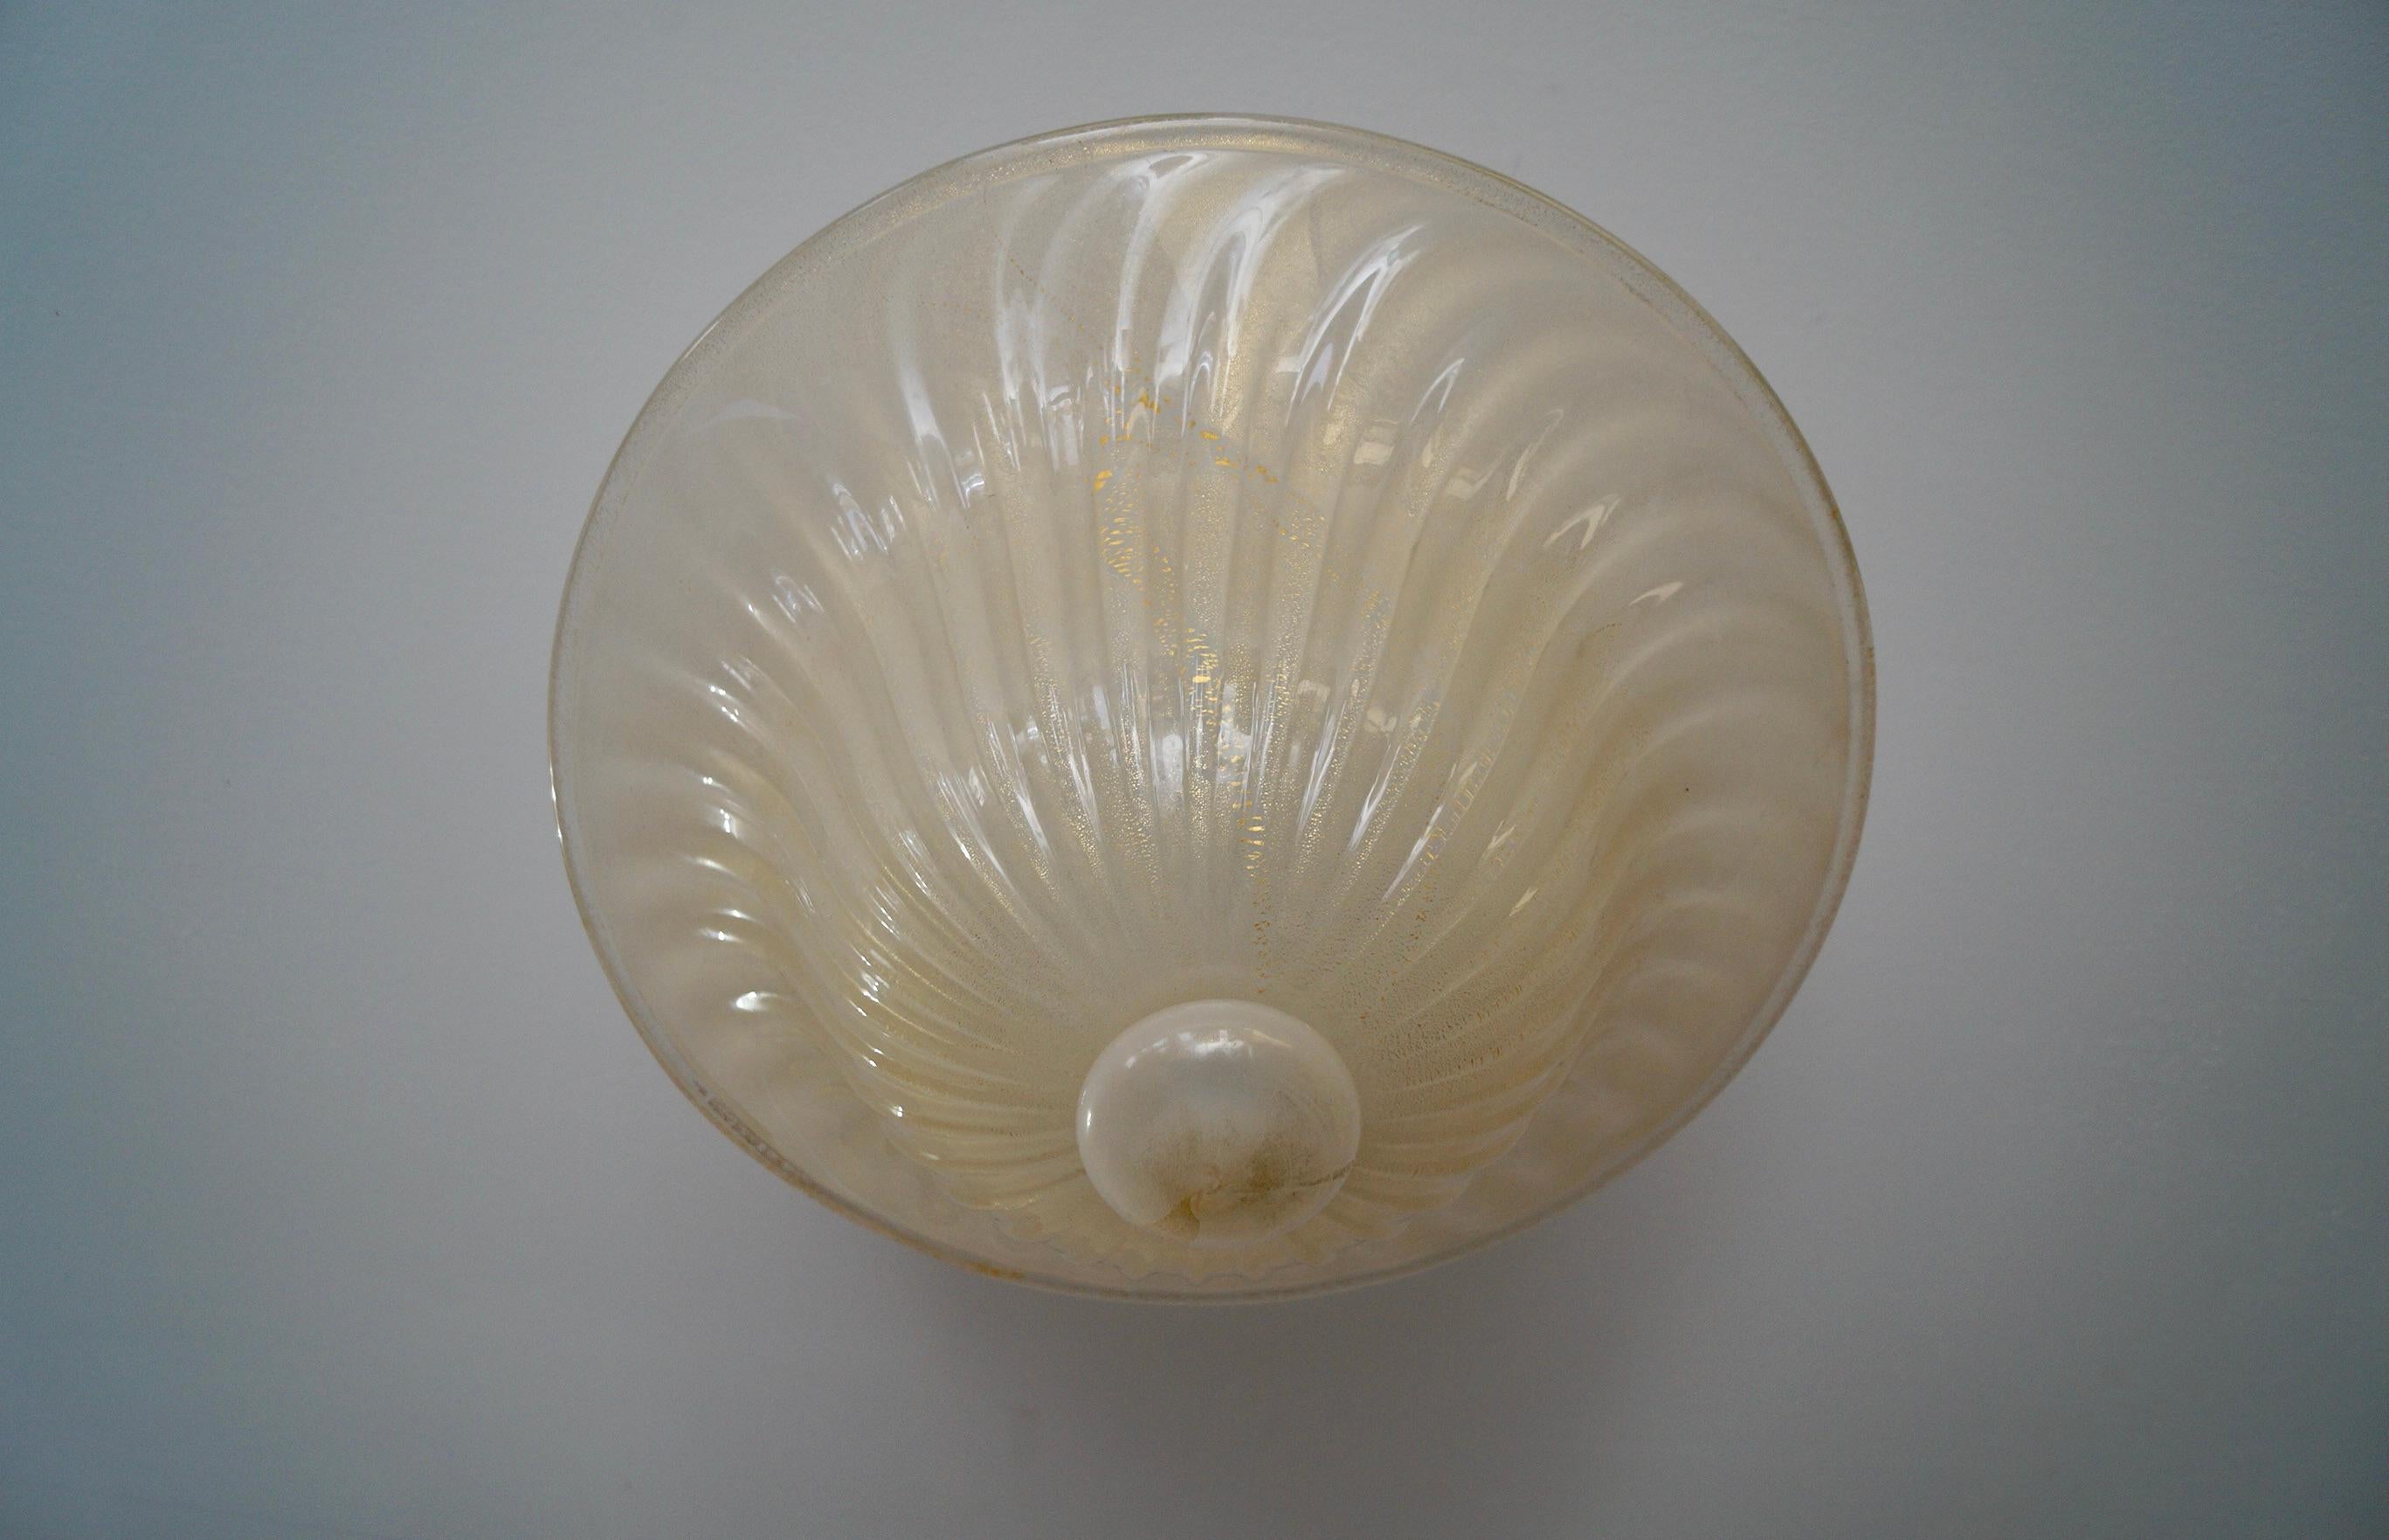 Vintage 1960s Murano glass ceiling lamp for sale. Very beautiful, and in excellent condition with no chips or deep scratches. Made of thick glass with gold specks. It's a rare Italian lamp, and very beautiful. Would make any room elegant. Has two